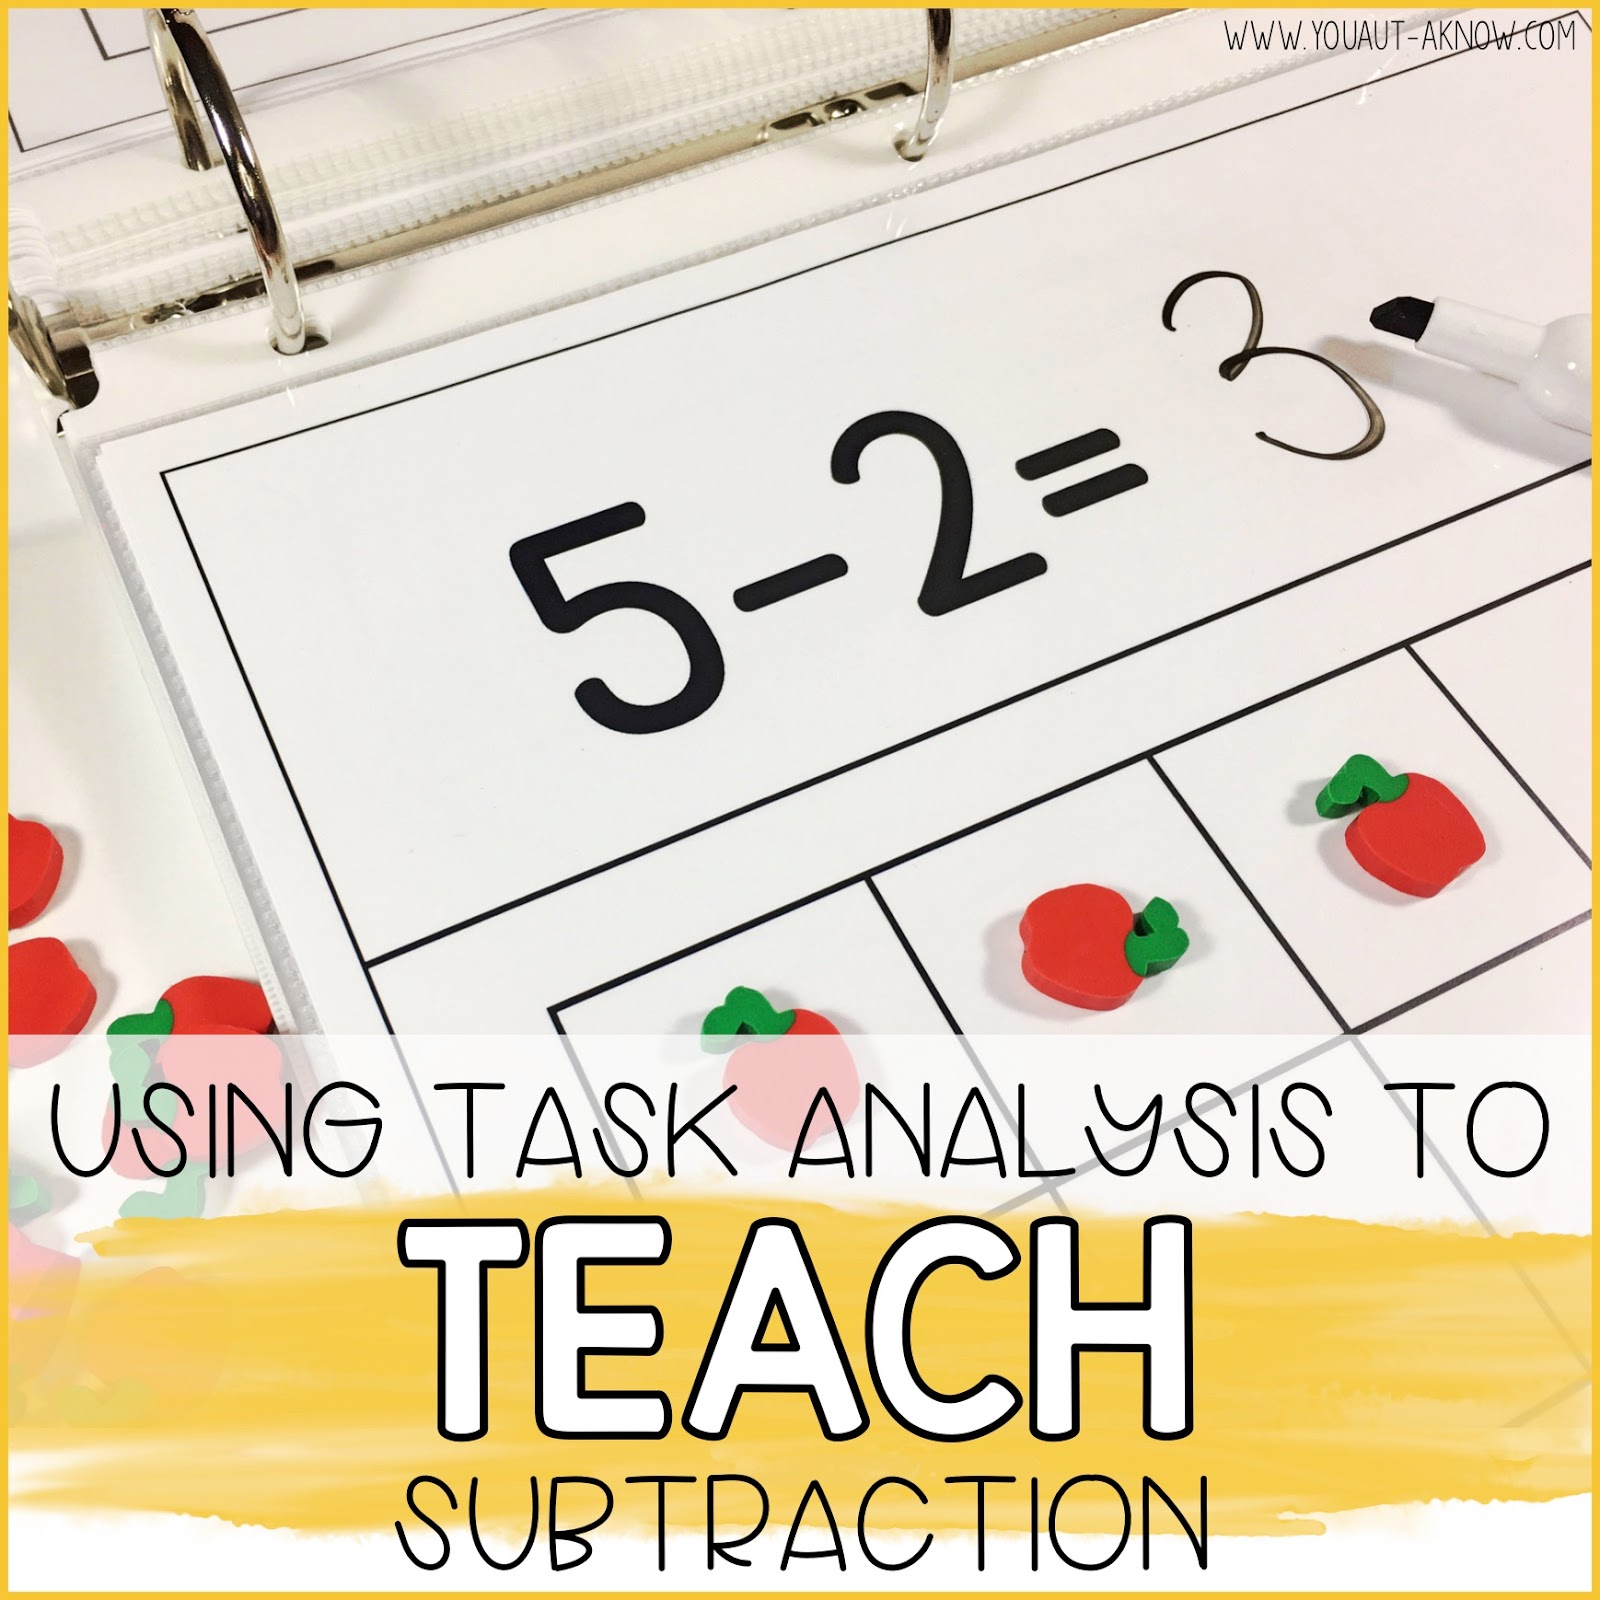 Using Task Analysis to Teach Subtraction - You Aut-A Know Regarding Task Analysis Template Autism Throughout Task Analysis Template Autism